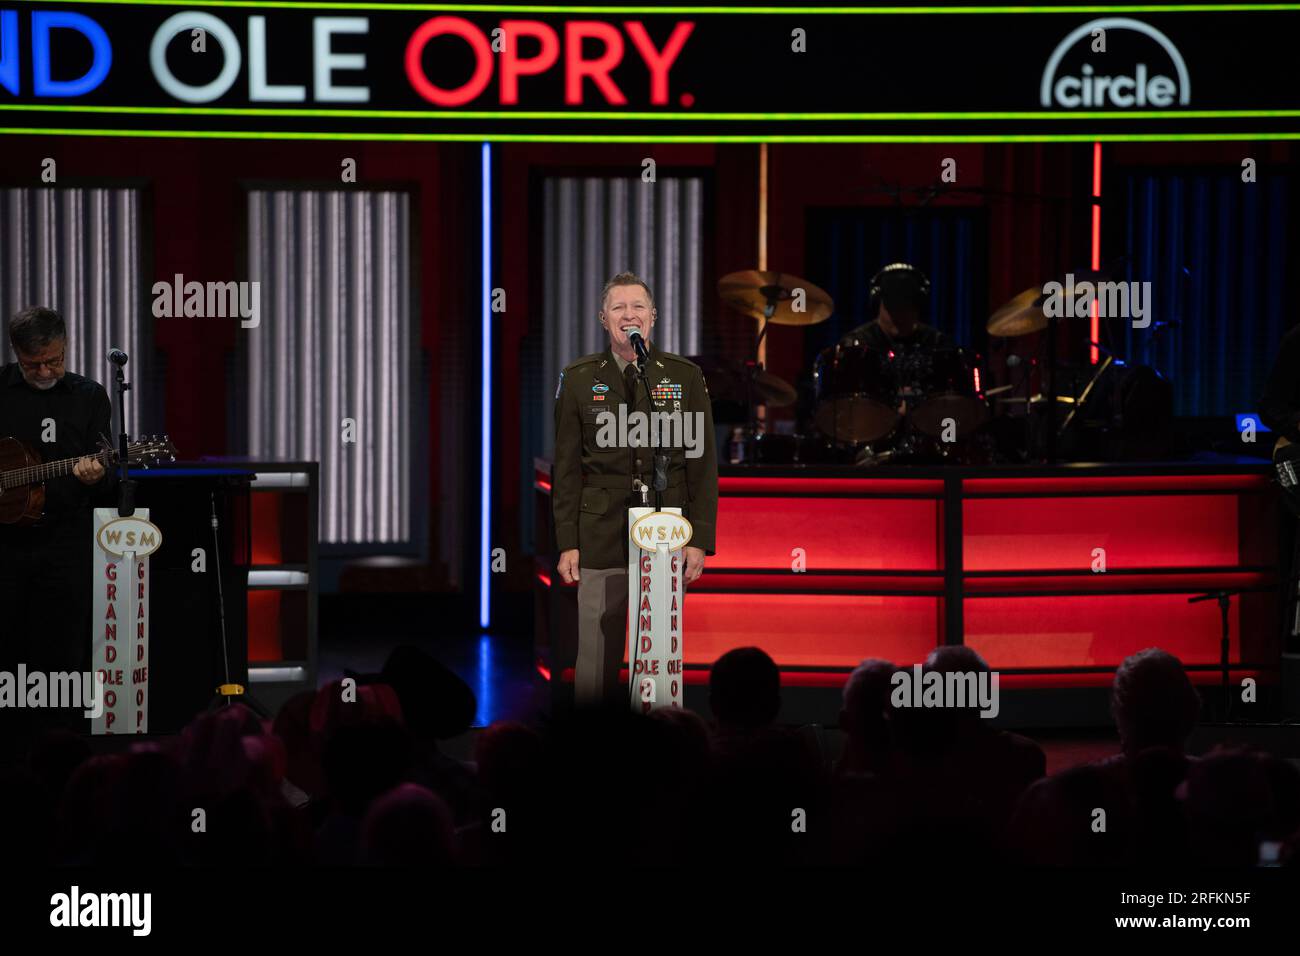 Nashville, United States. 29 July, 2023. Country music artist Craig Morgan, center, performs wearing his army uniform onstage at the historic Grand Ole Opry, July 29, 2023 in Nashville, Tennessee, USA. The 59-year-old singer took the oath of service and reenlisted in the Army Reserves during his show and will serve as a Warrant Officer.  Credit: Lara Poirrier/U.S Army Photo/Alamy Live News Stock Photo